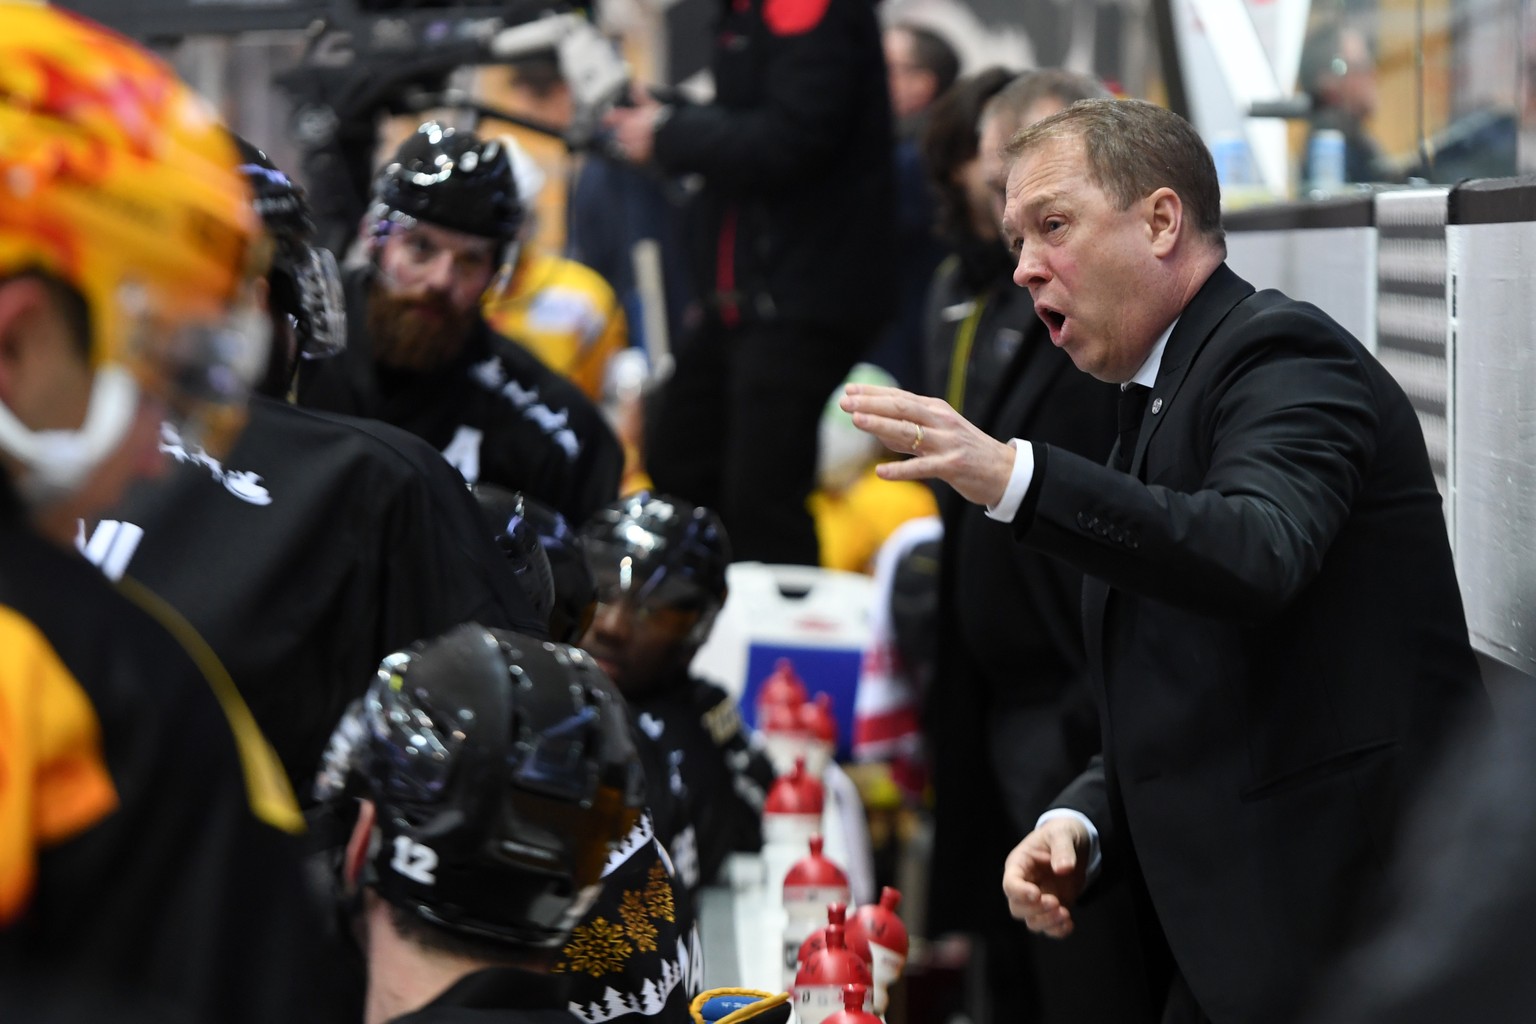 Lugano’s Head Coach Greg Ireland reacts during the preliminary round game of the National League Swiss Championship between HC Lugano and EHC Biel, at the ice stadium Resega in Lugano, on Saturday, De ...